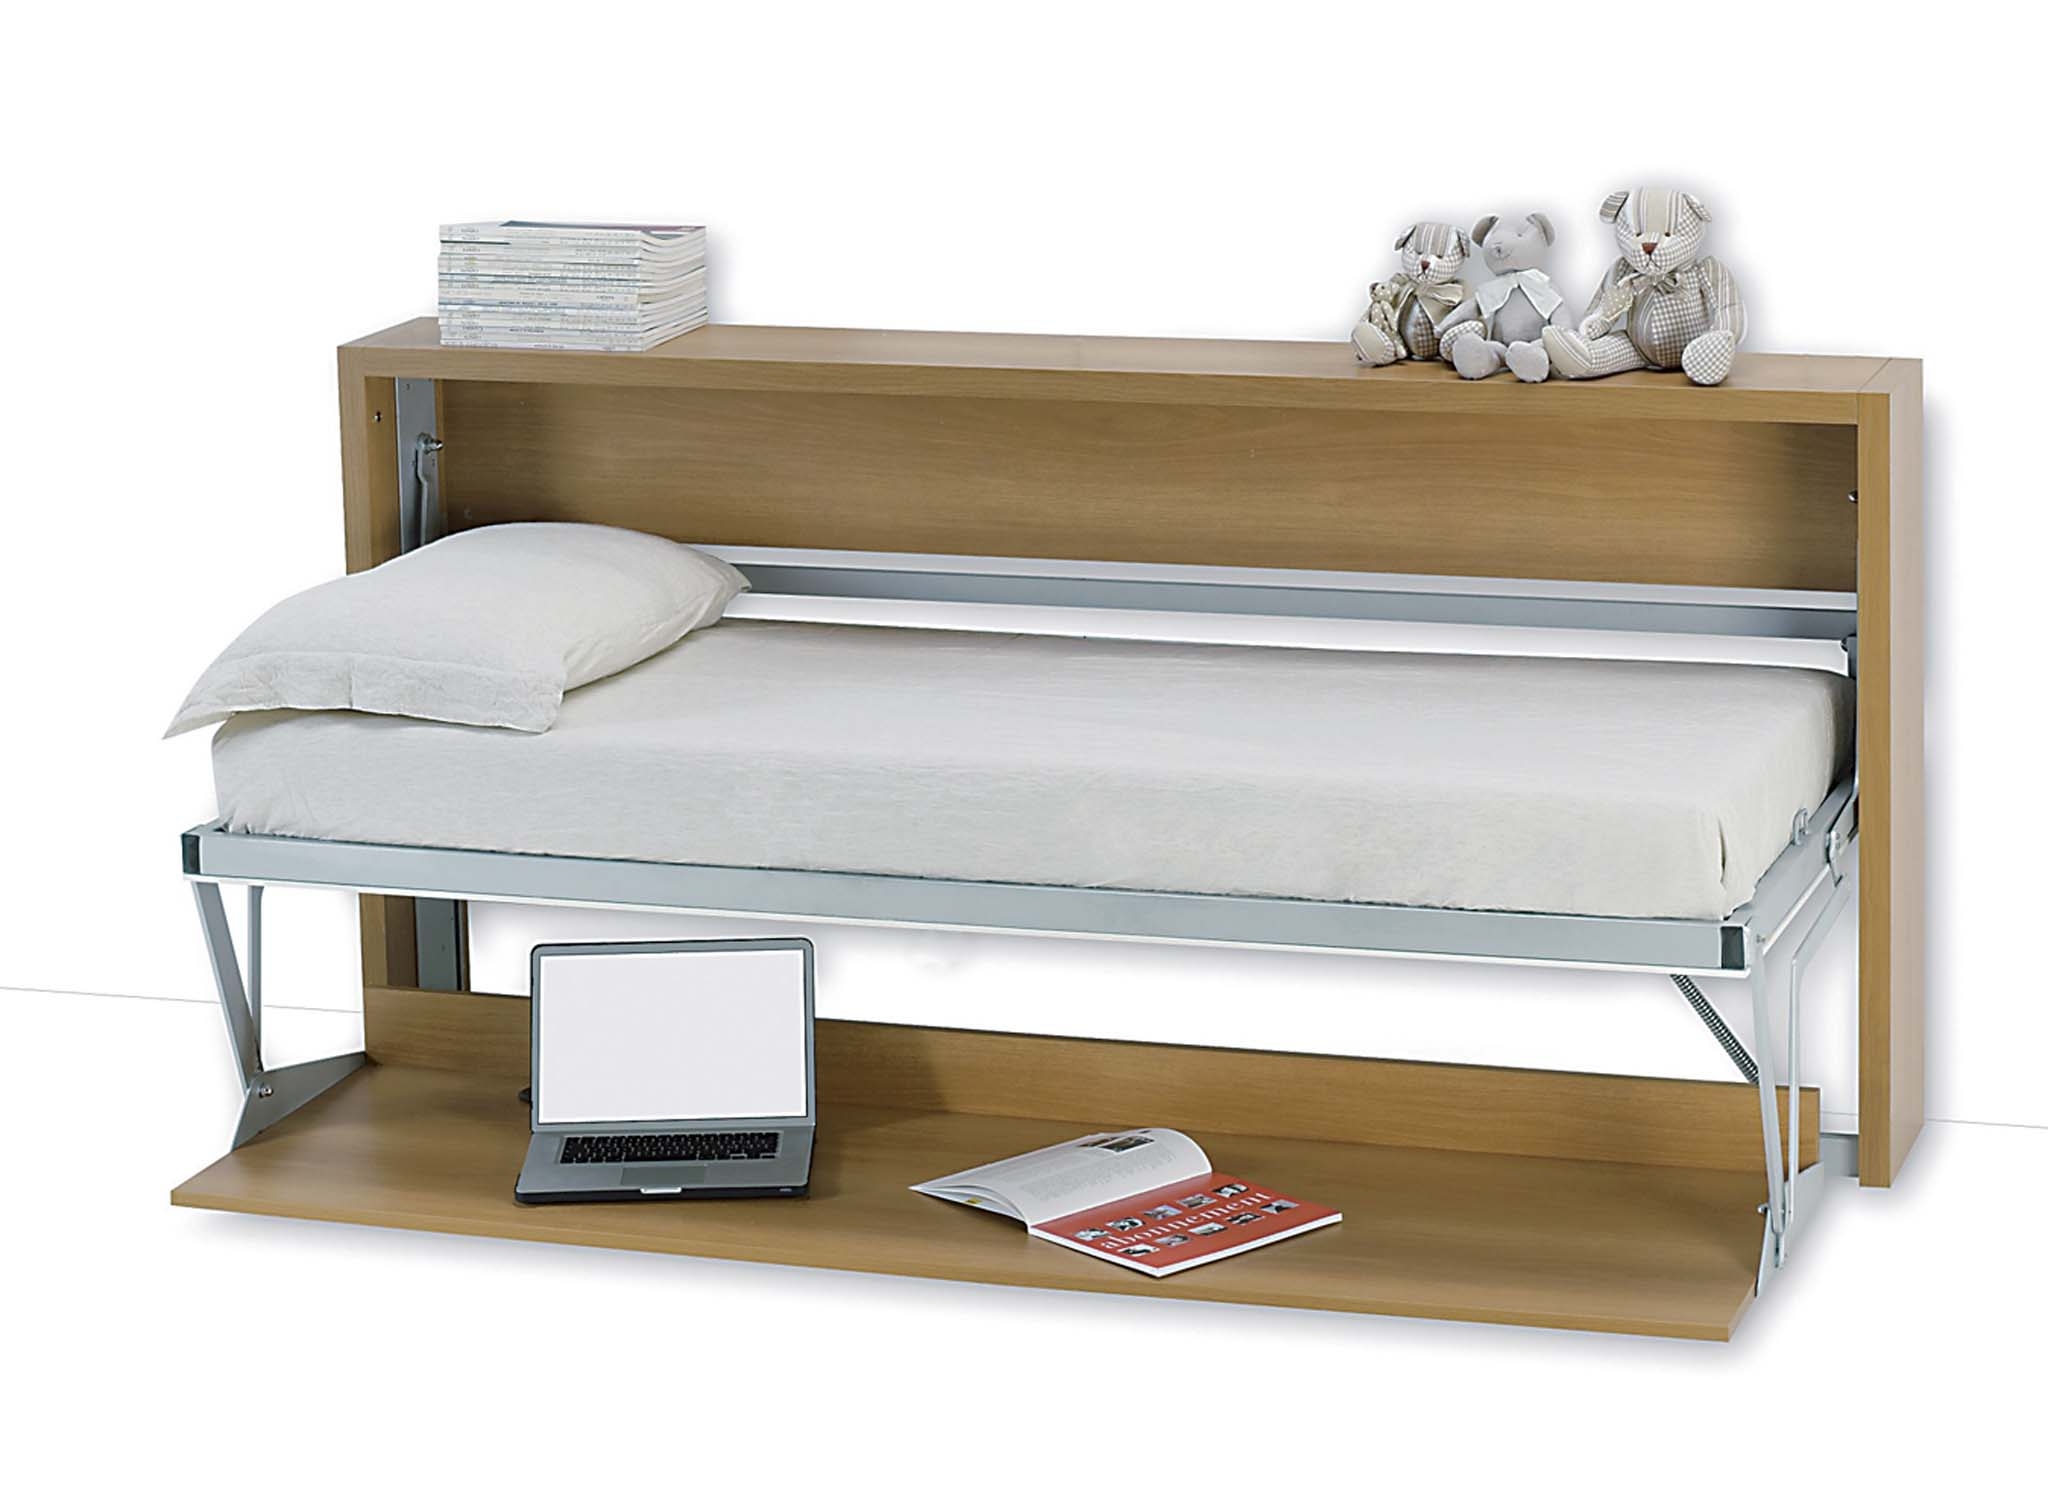 Space Saving Beds Visualhunt, Compact Twin Bed